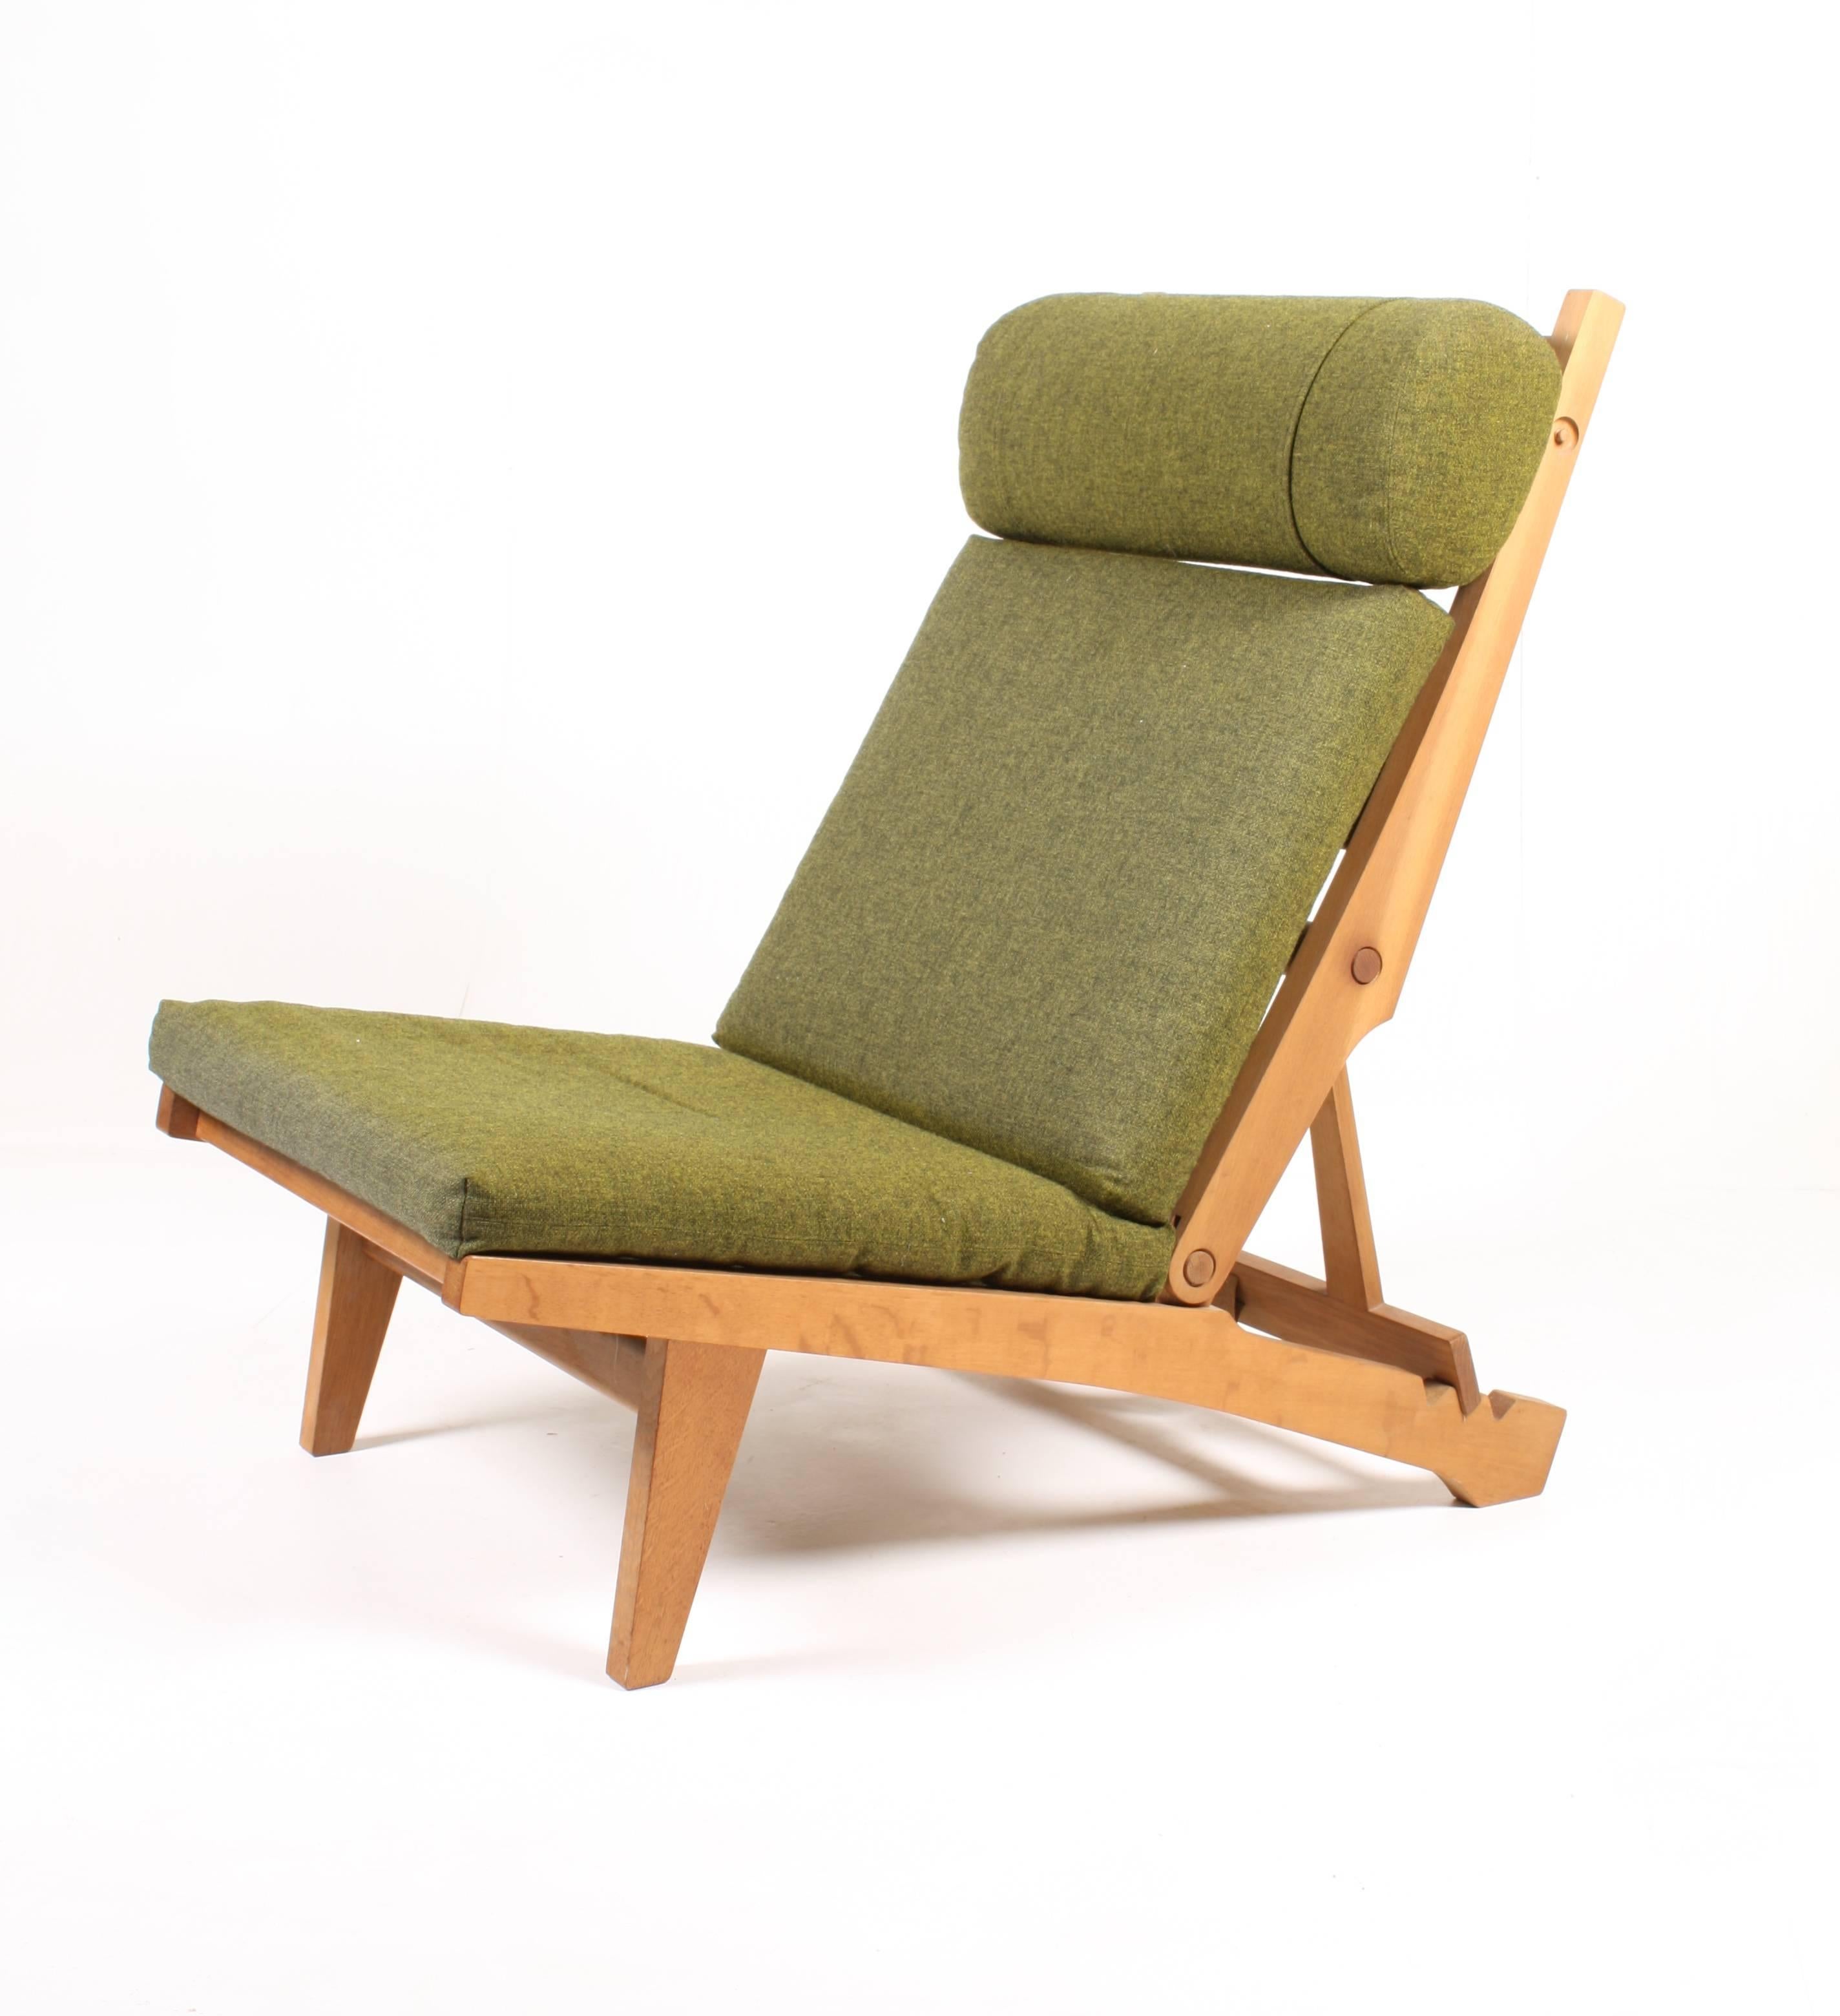 Three AP71 folding chairs in solid oak with green wool upholstery. The chairs can be put together for a sofa. Designed by Hans J Wegner for AP stolen Valby in the 1968. Great original condition. A rare oak frame folding lounge chair with an